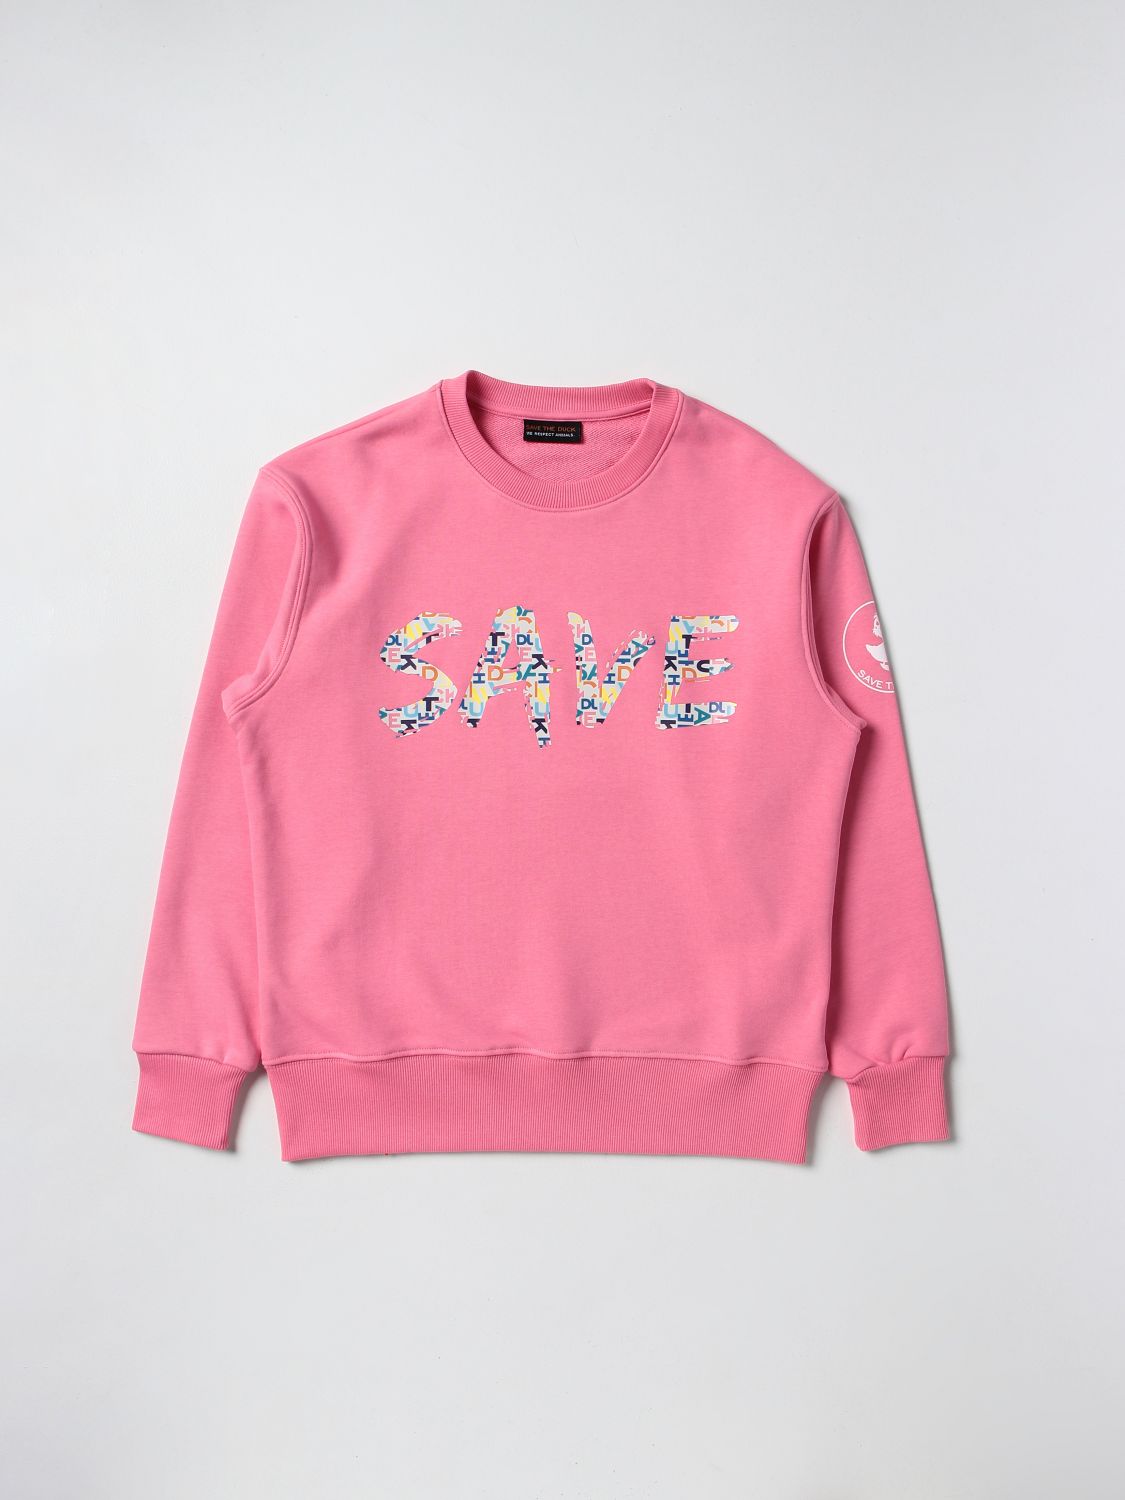 Save The Duck Outlet: jumper for girl - Pink | Save The Duck jumper ...